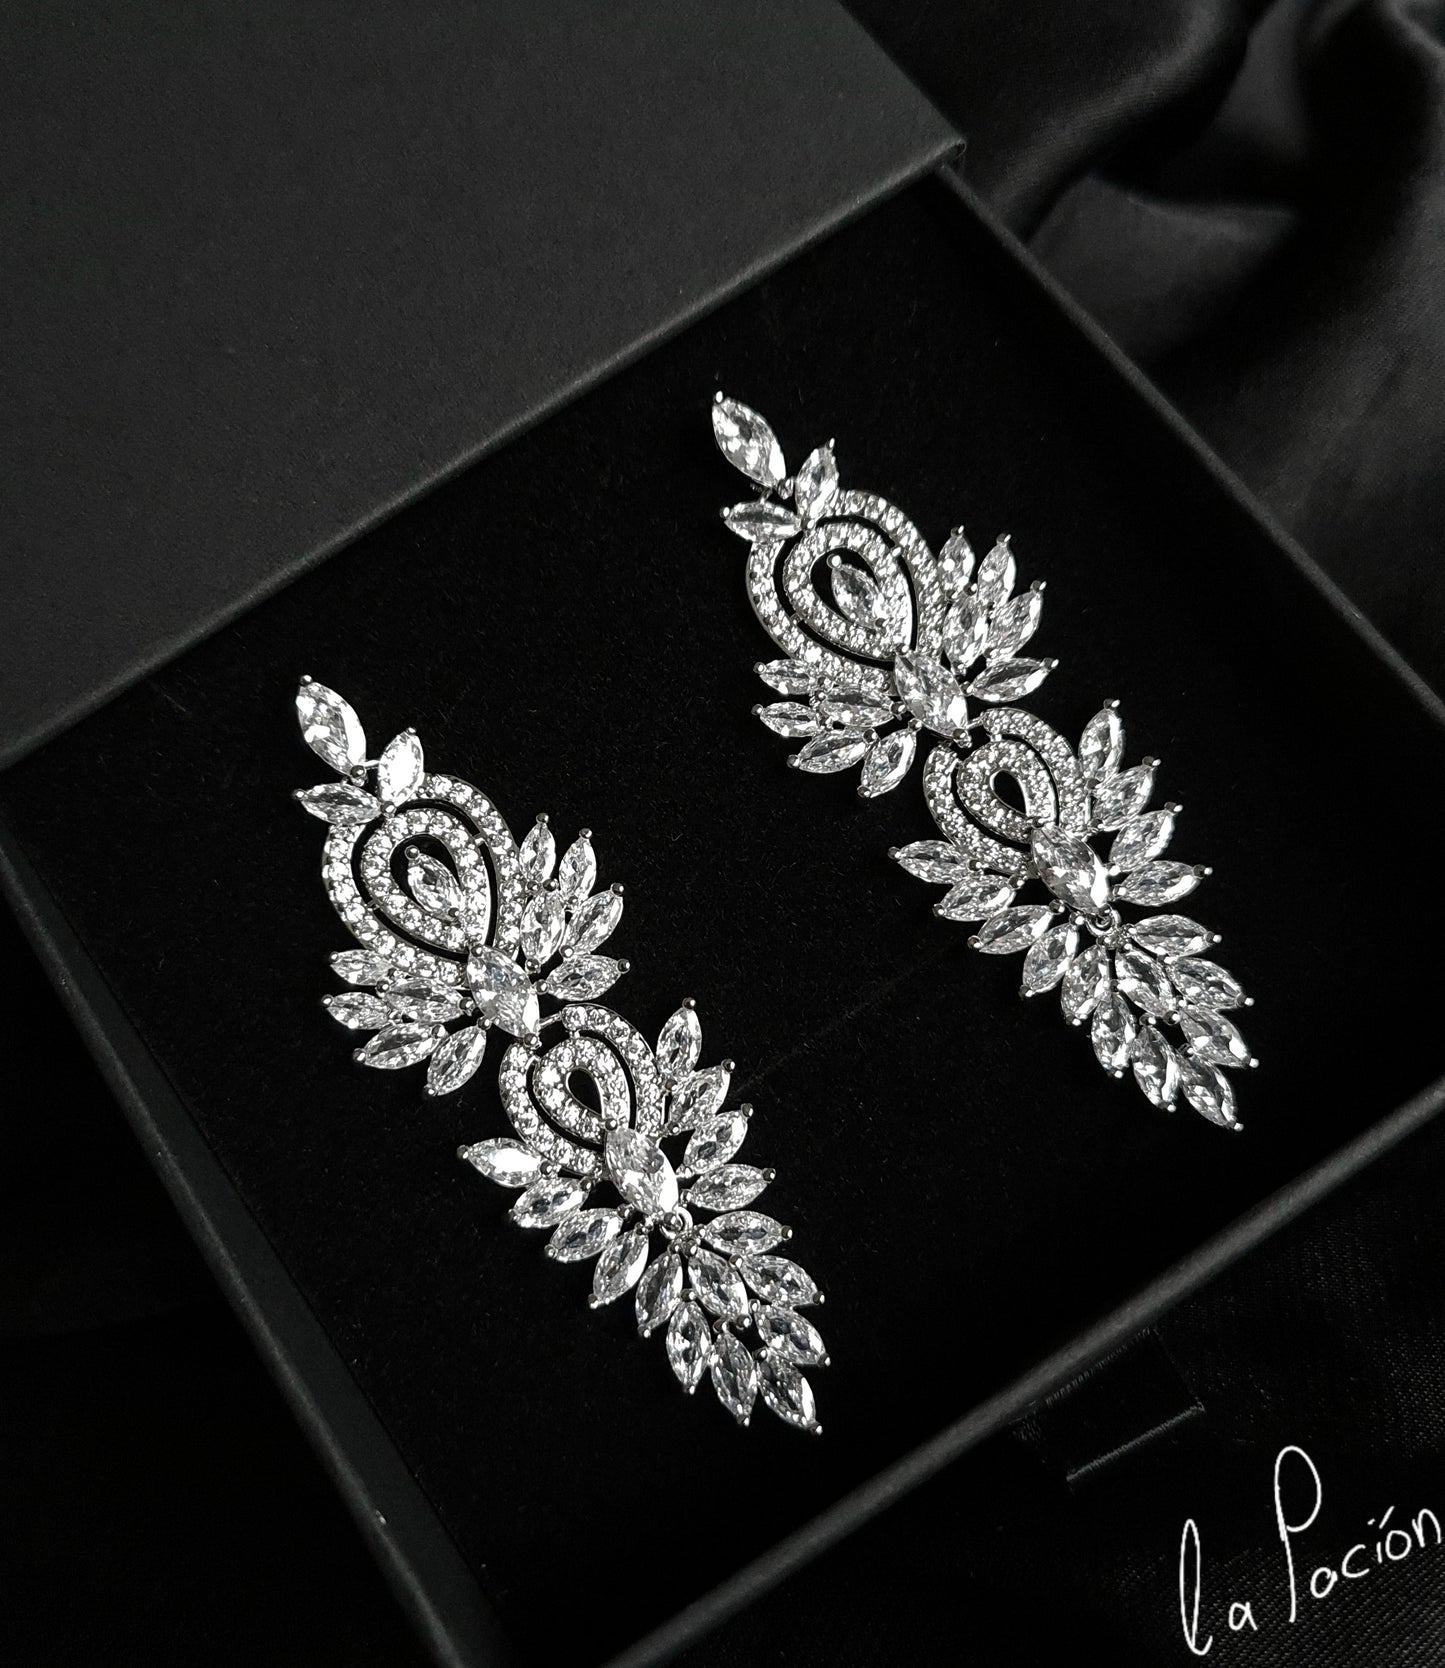 Dazzling "Anna" earrings featuring radiant cubic zirconia stones.